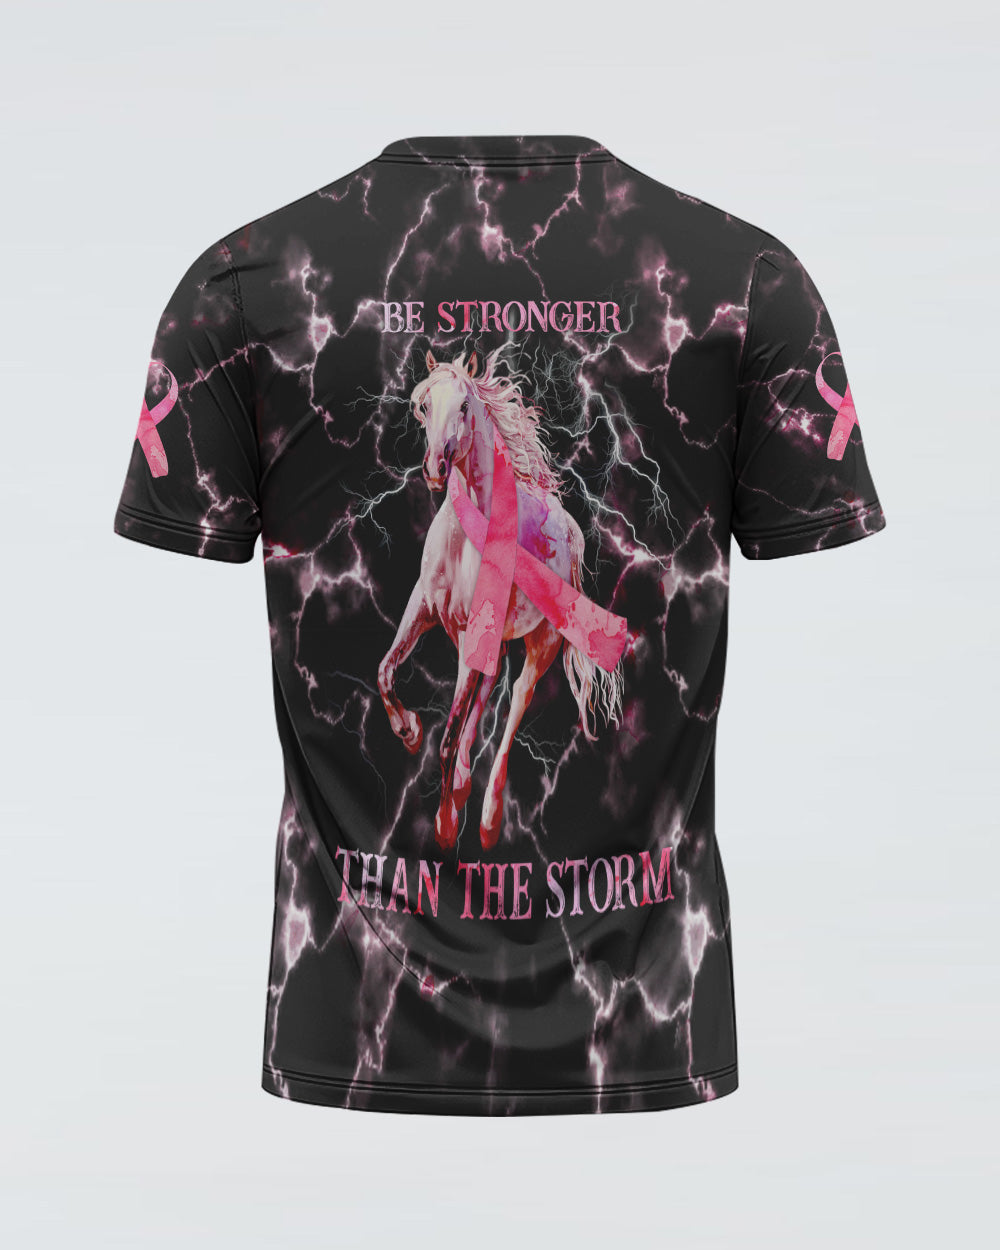 Be Stronger Than The Storm Horse Women's Breast Cancer Awareness Tshirt